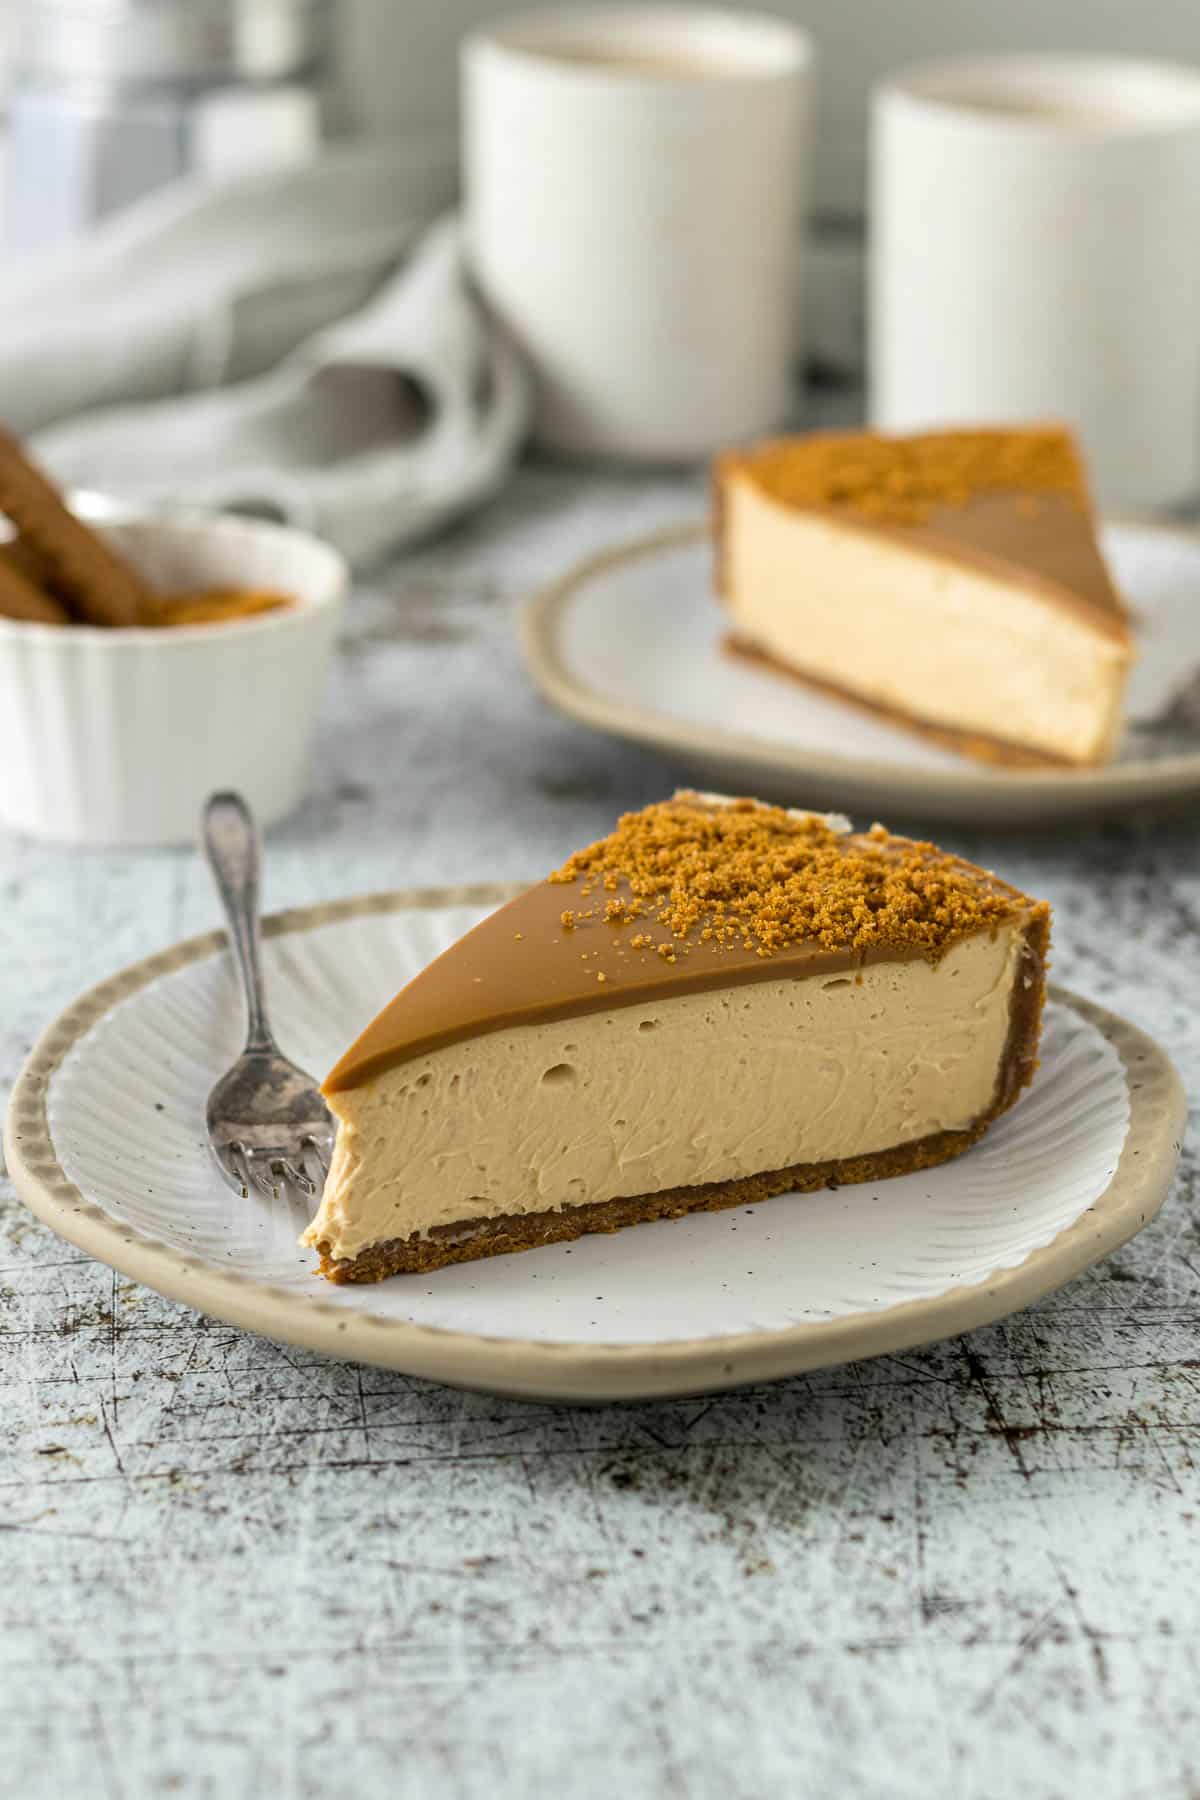 A slice of Biscoff cheesecake on a plate showing the layers of biscuit crust, cheesecake filling, and Biscoff spread topping.